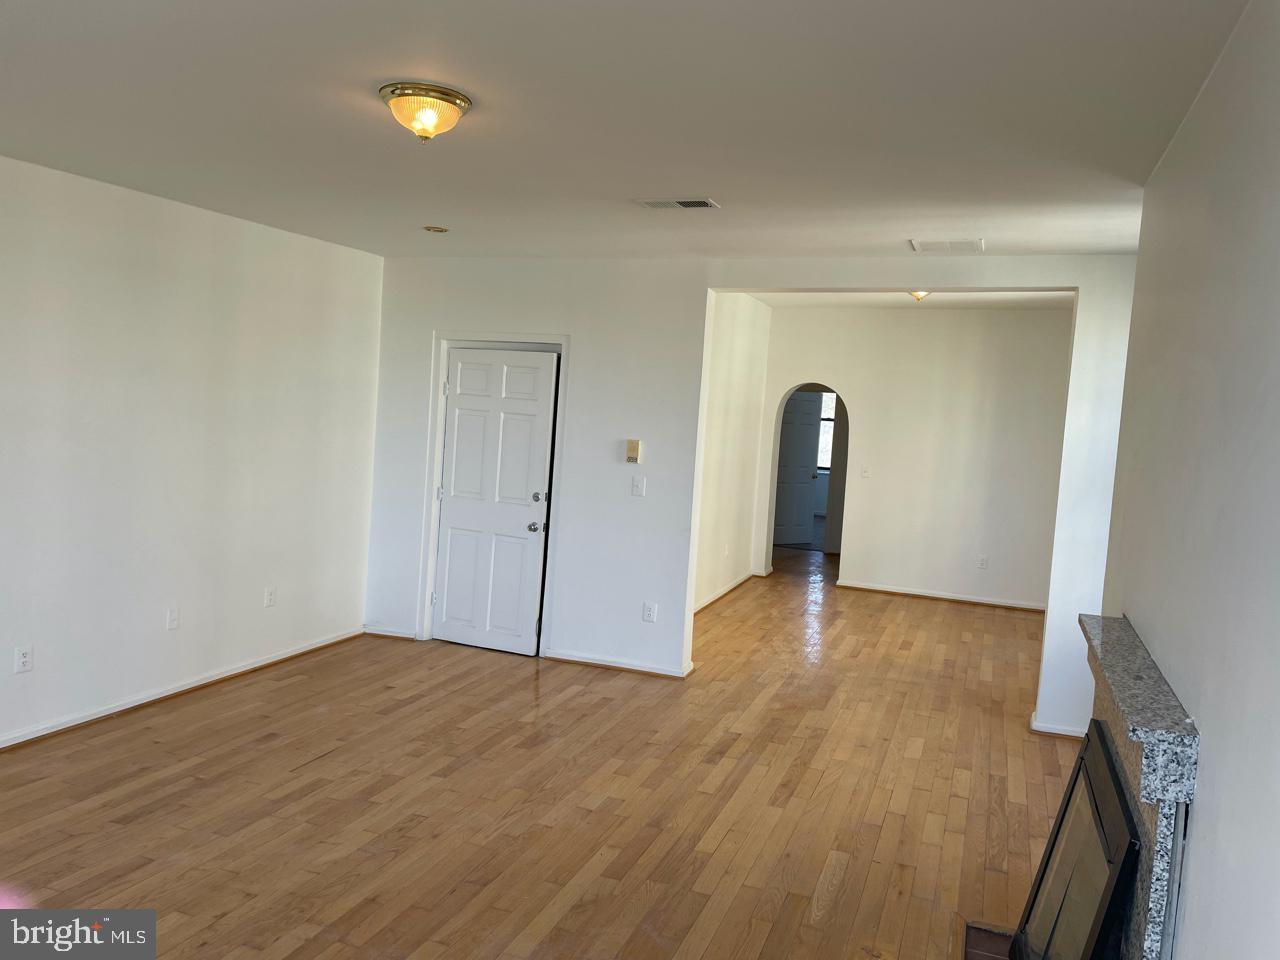 a view of empty room with wooden floor and window